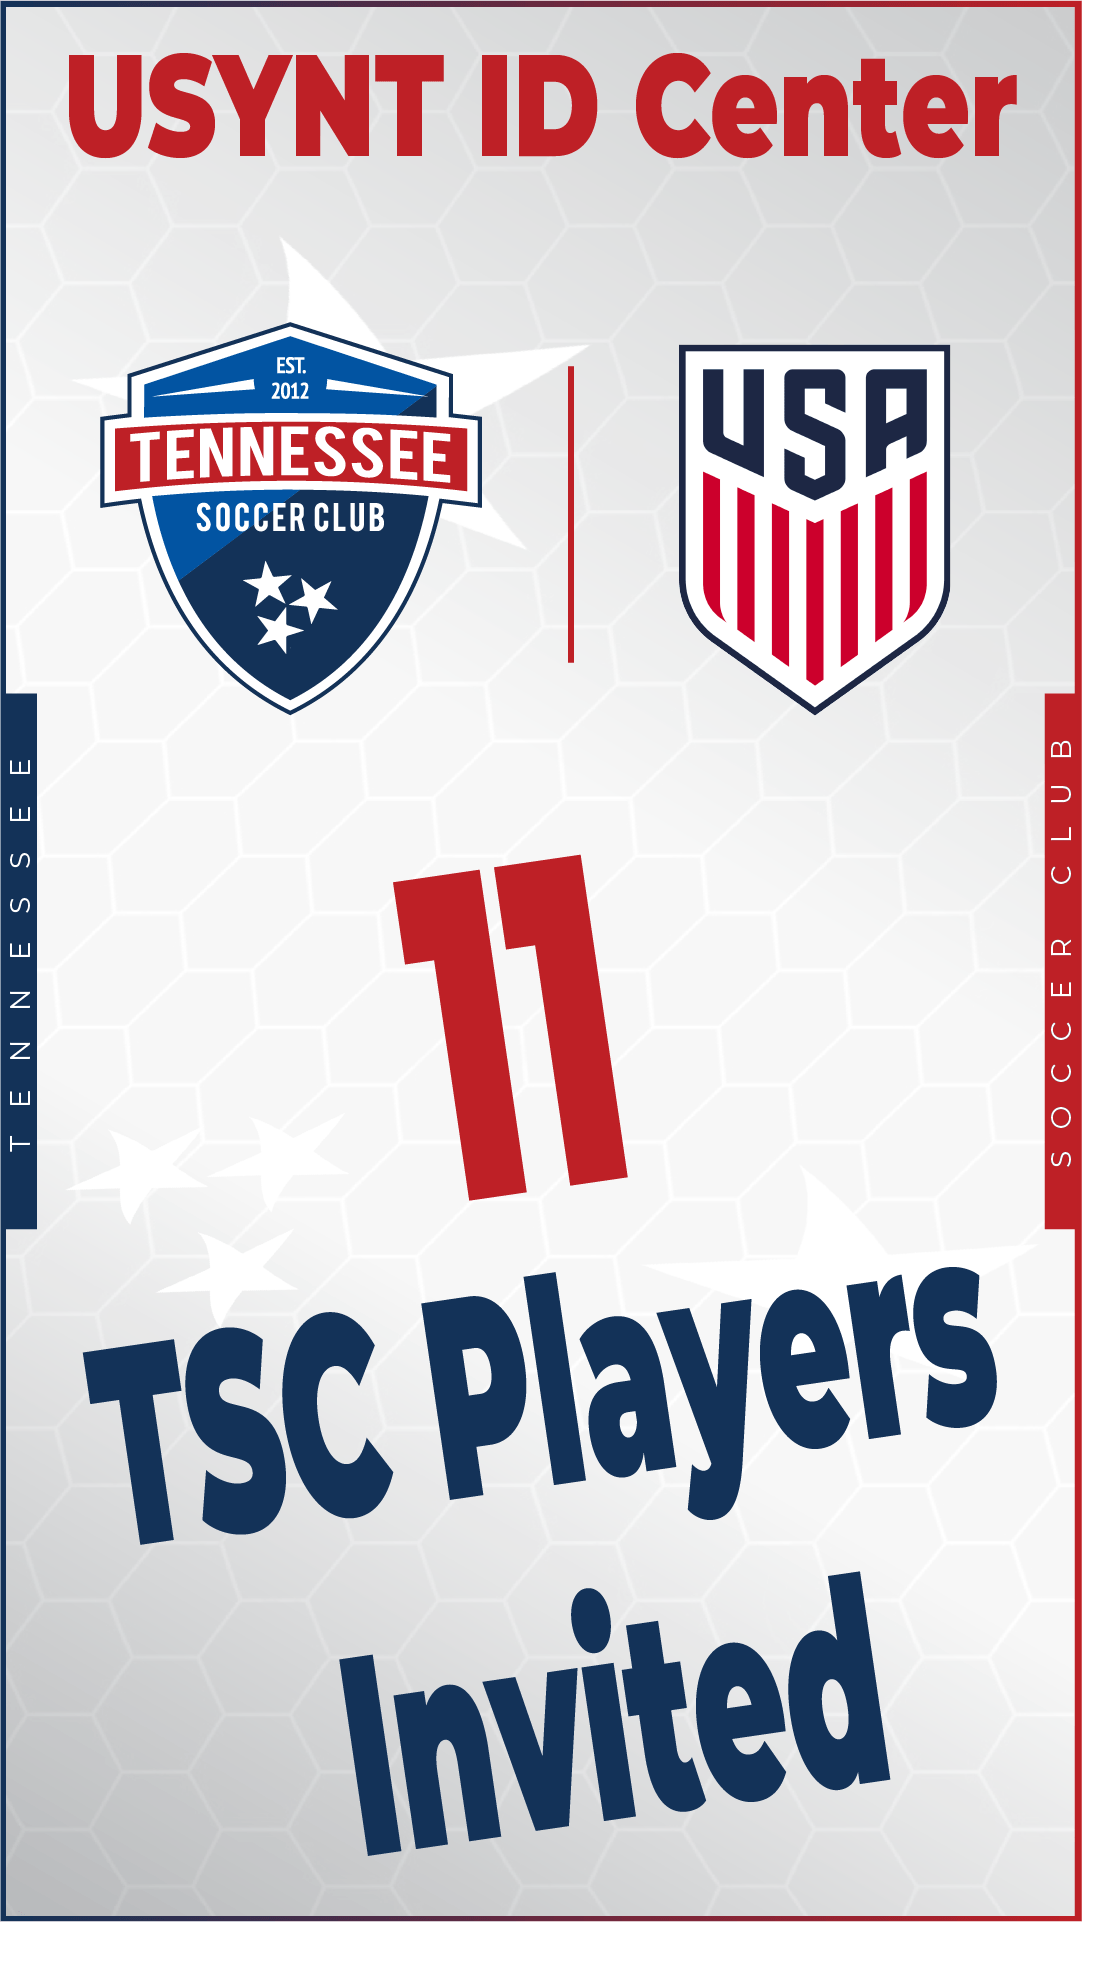 11 TSC Players invited to USYNT ID Center